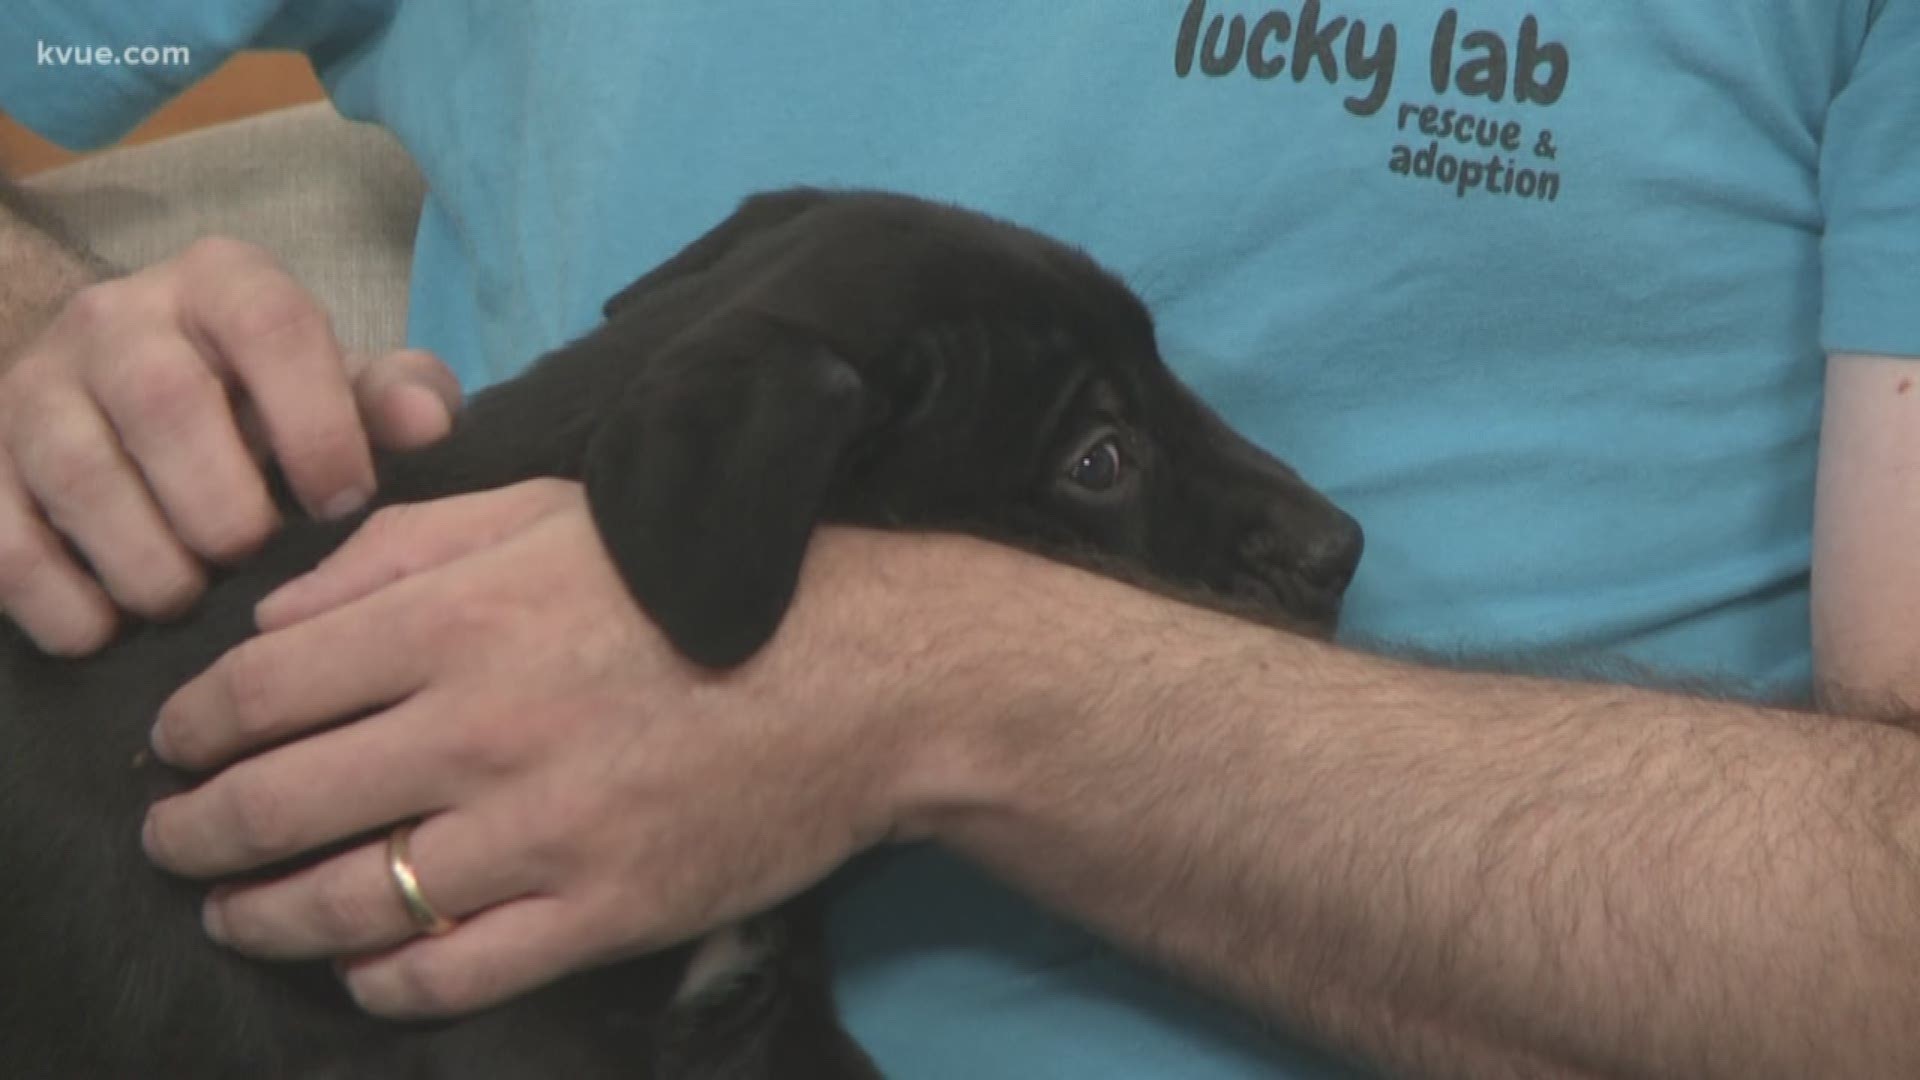 Aaron Gelfand with Lucky Lab Rescue brought three adorable puppies searching for forever homes.